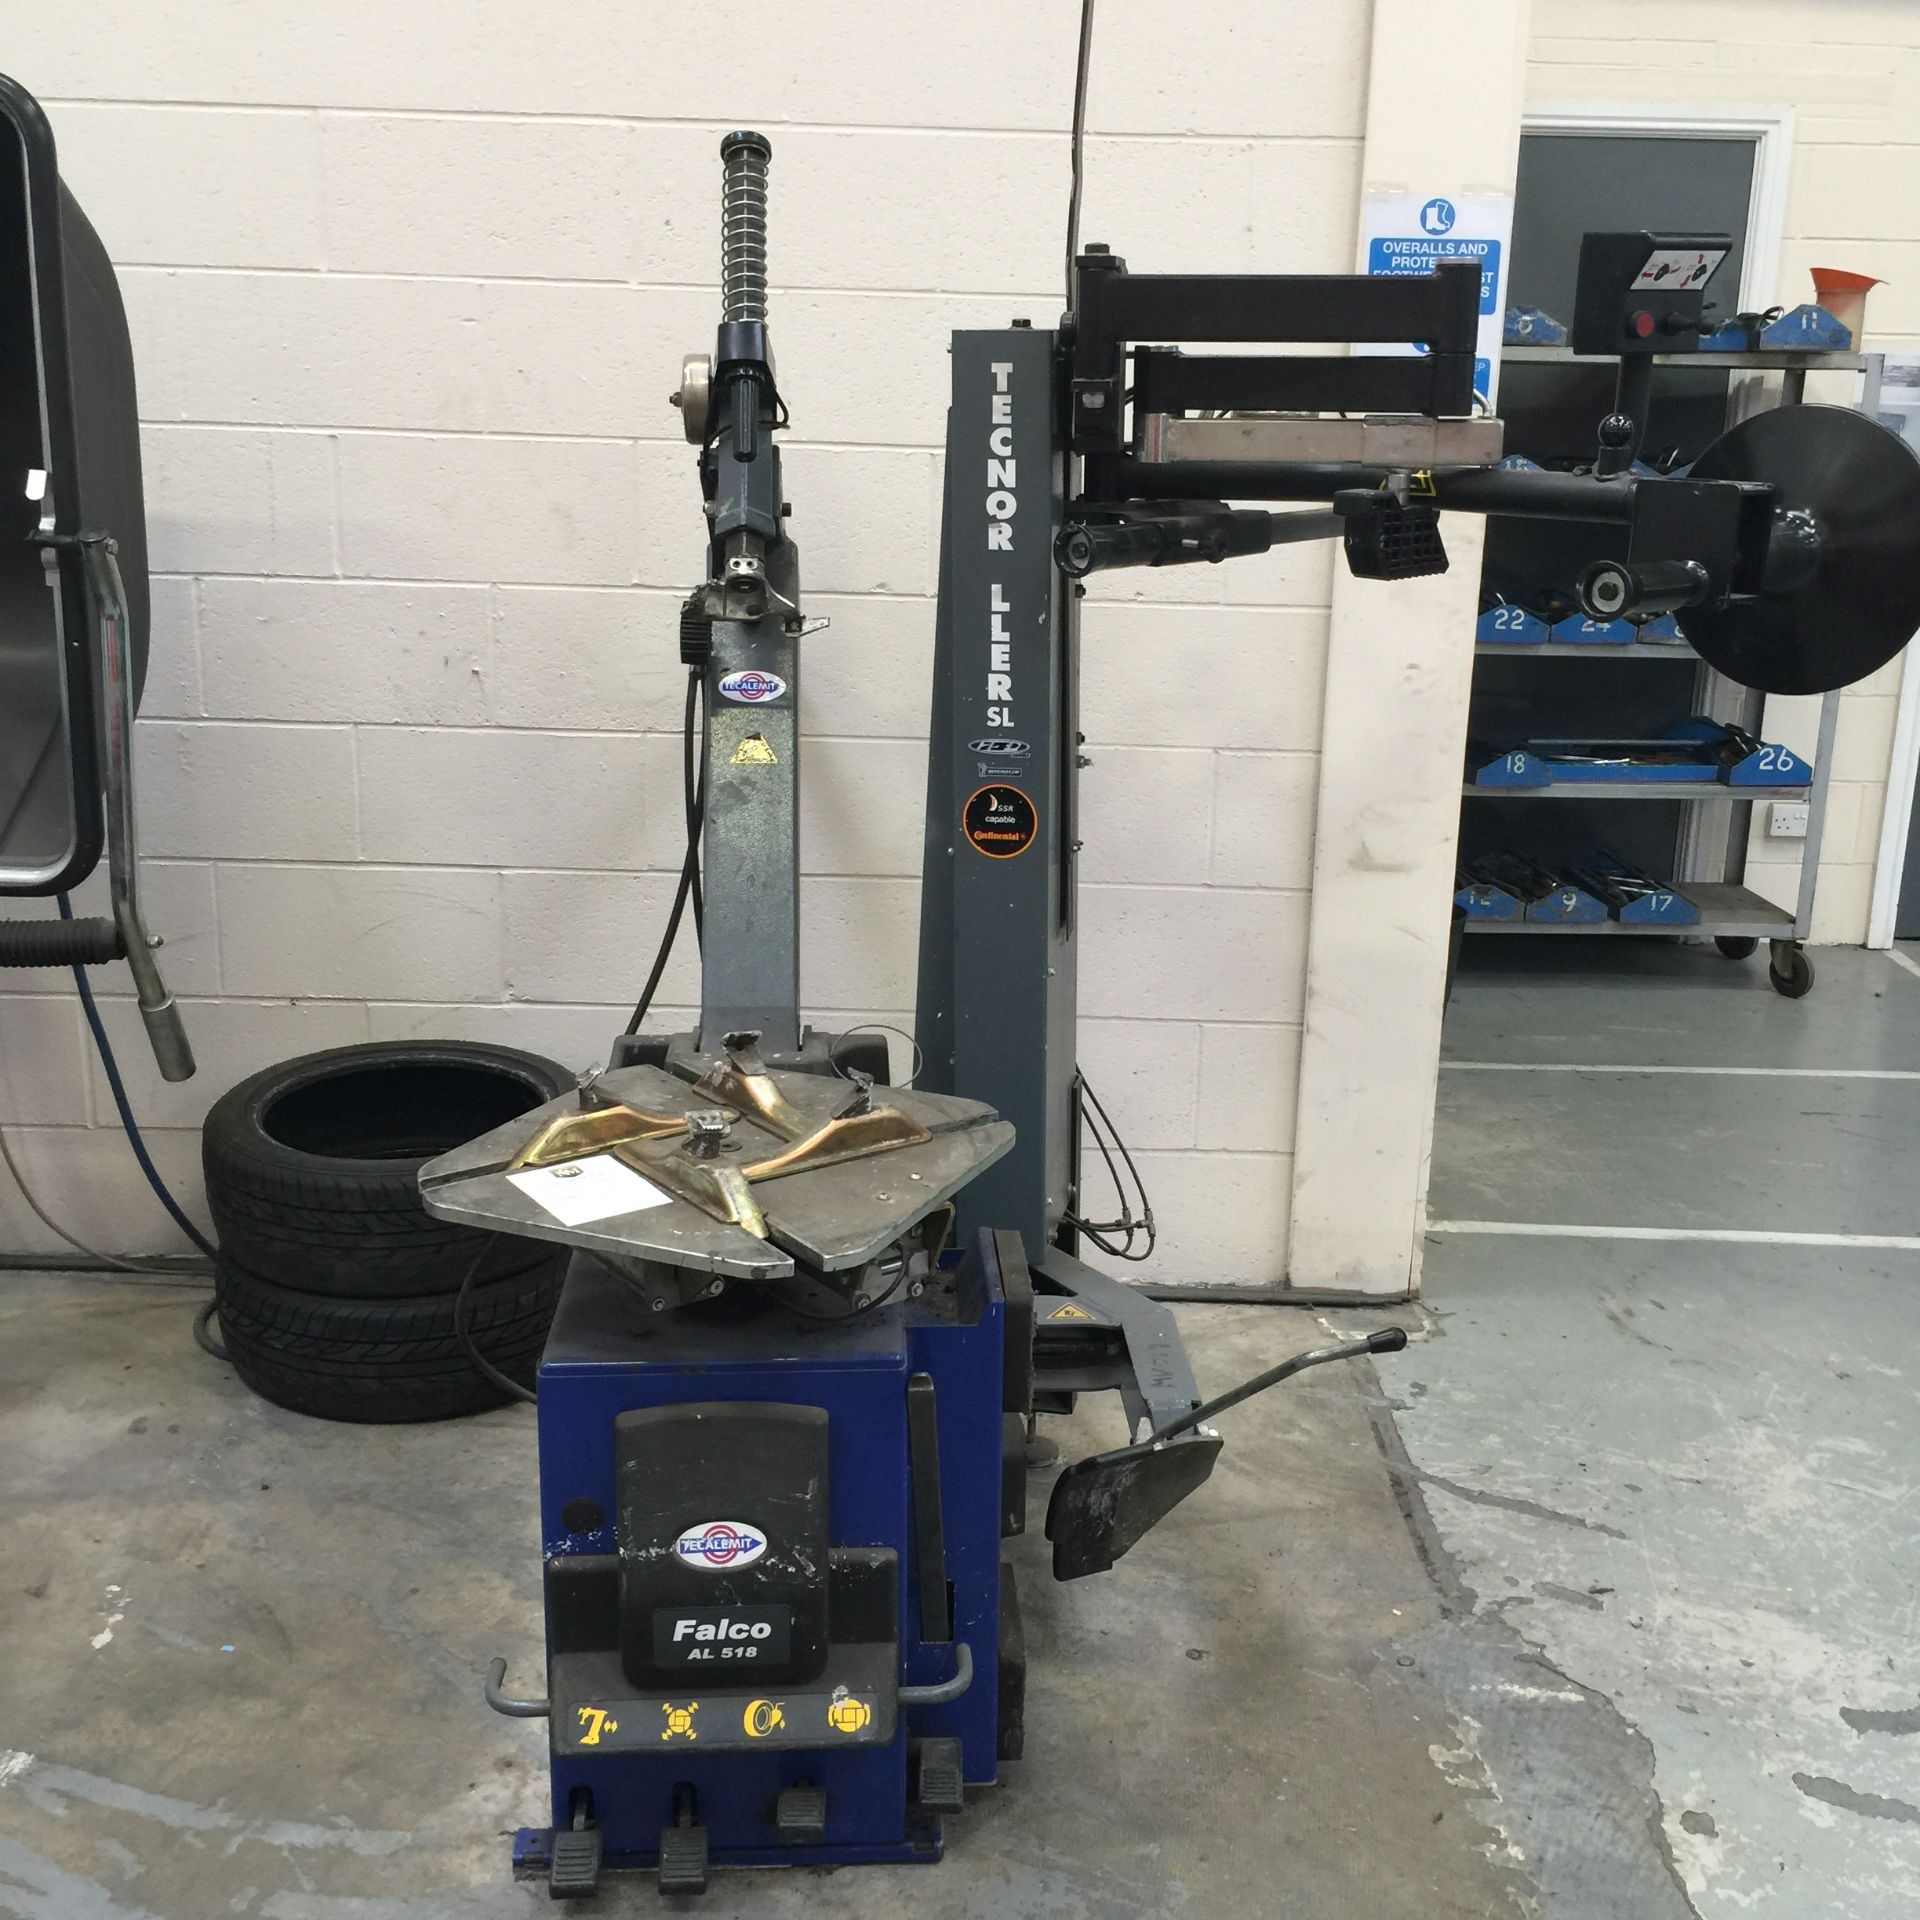 TECALEMIT FULLY AUTOMATIC TYRE CHANGER - INCLUDES TECNOROLLER SL   , FALCO AL 518 - Image 3 of 6